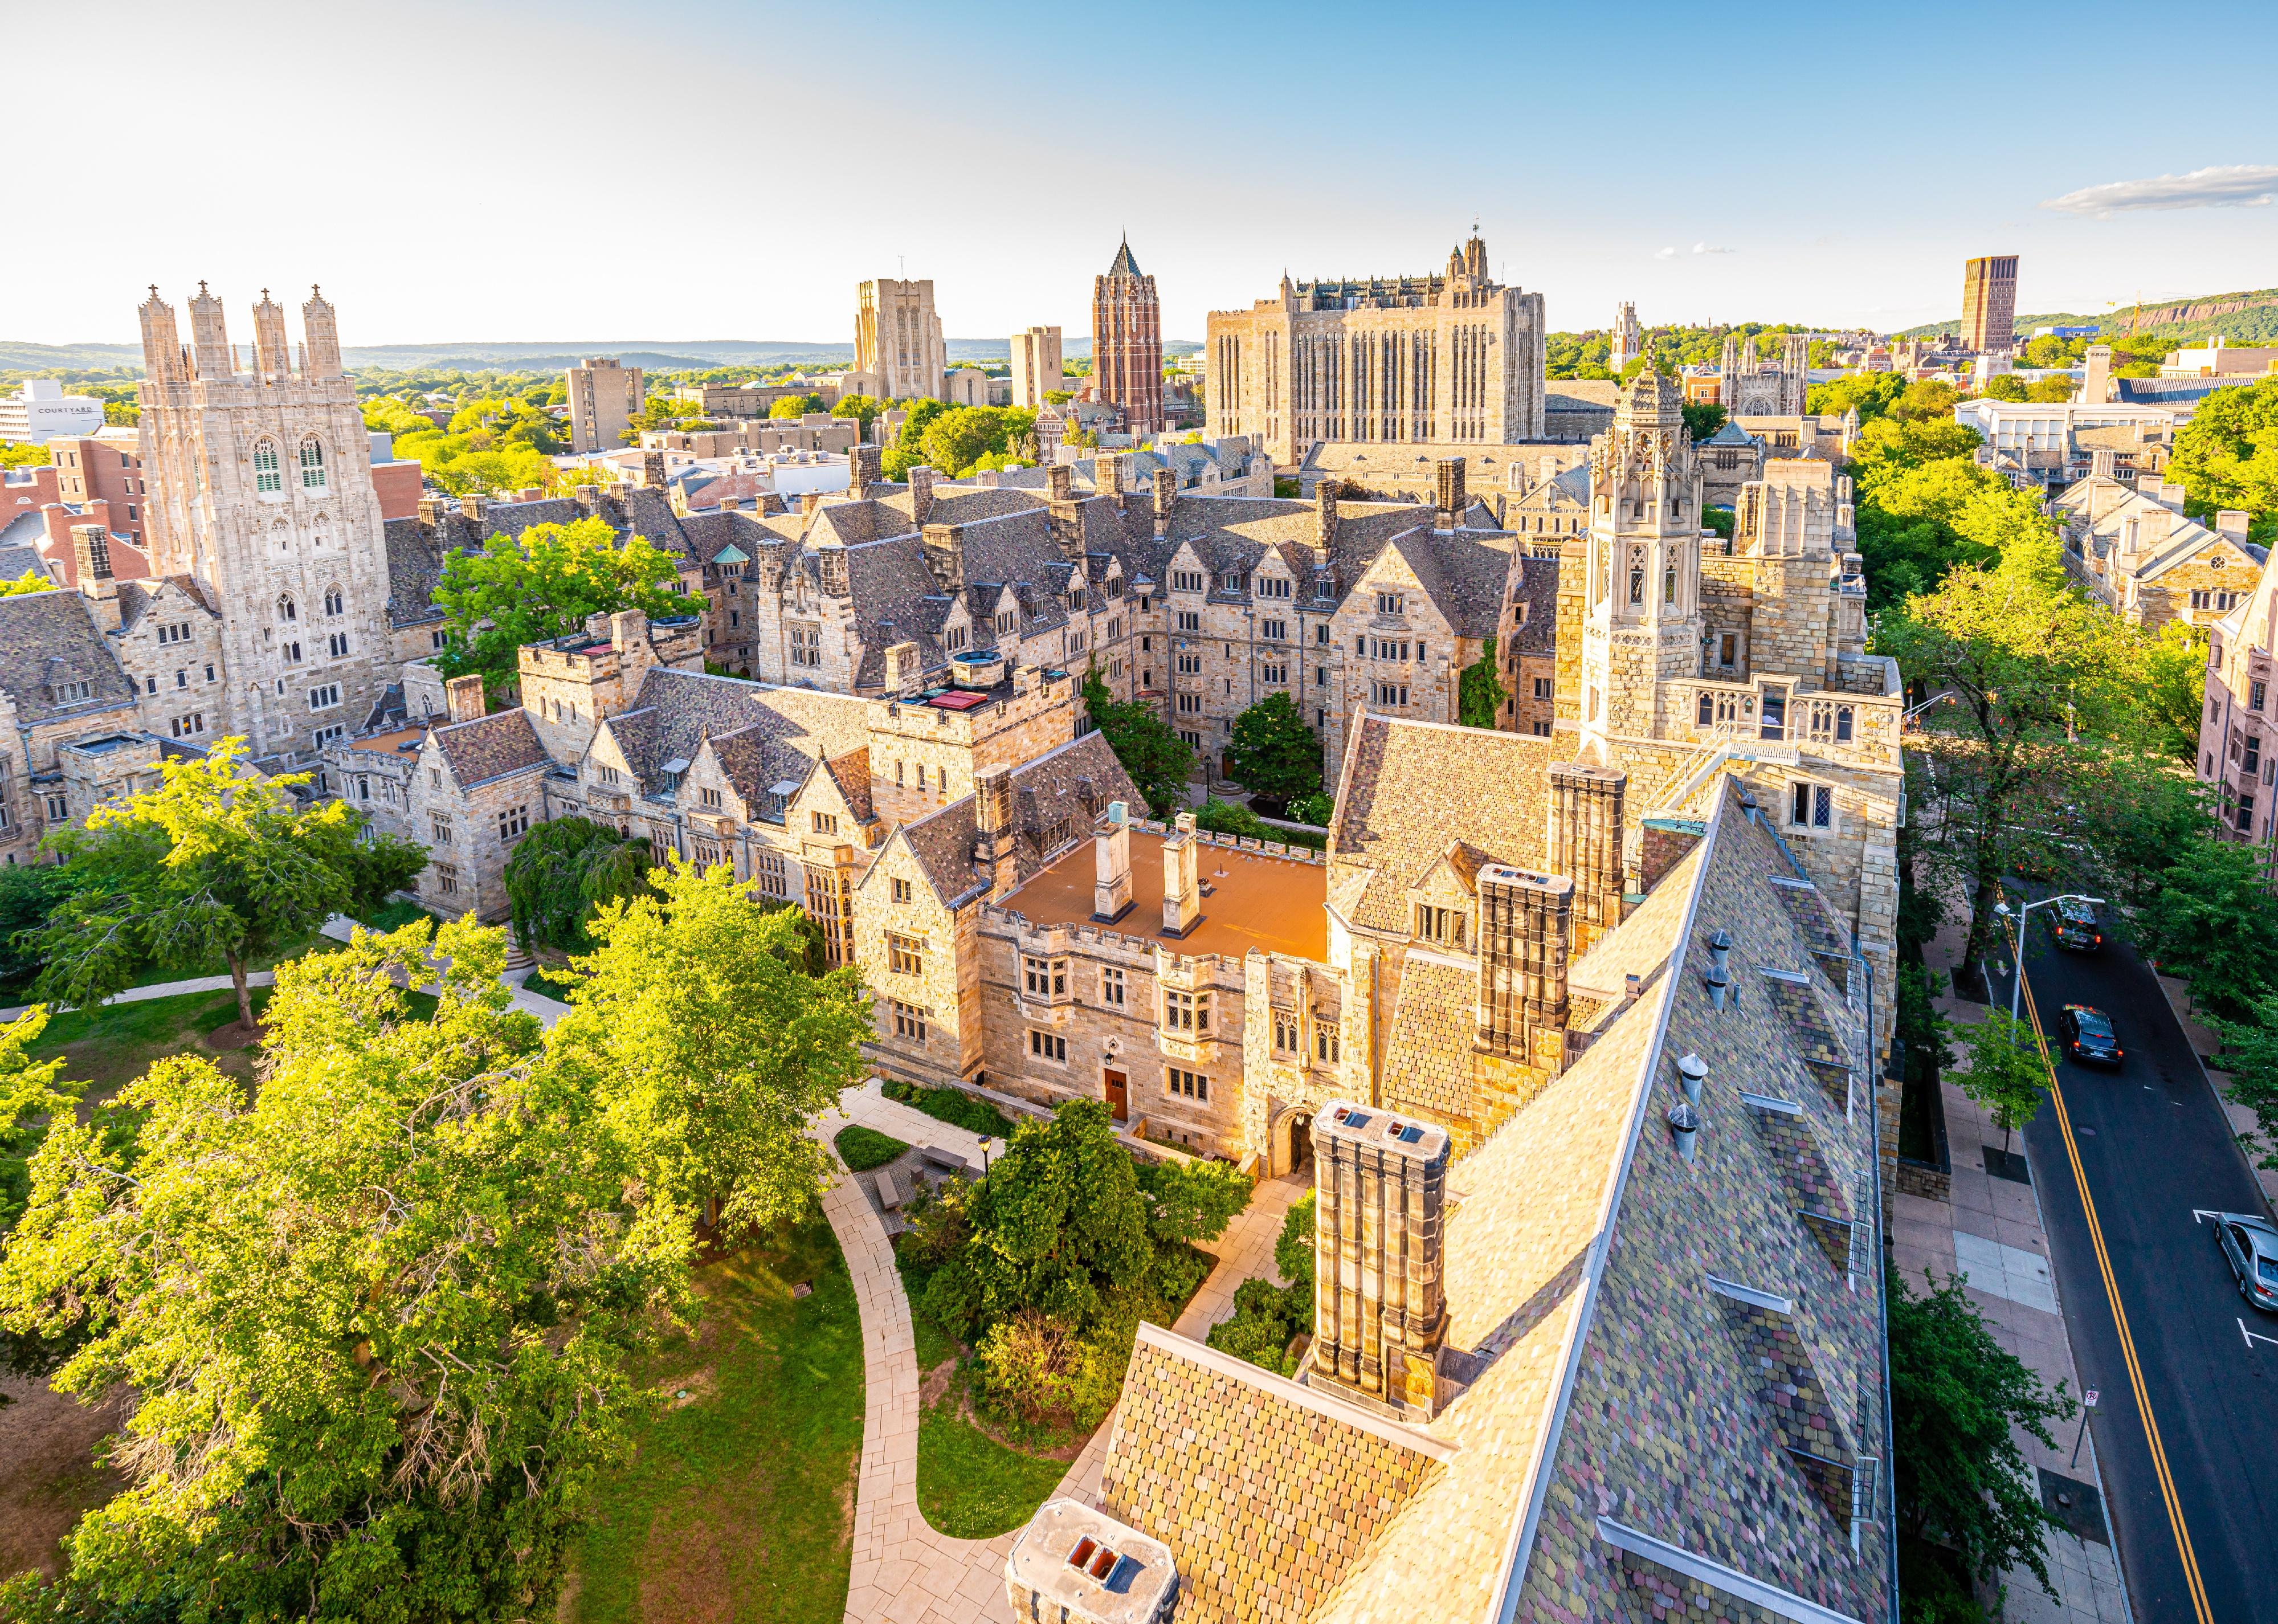 View of Yale University central campus from Harkness Tower.